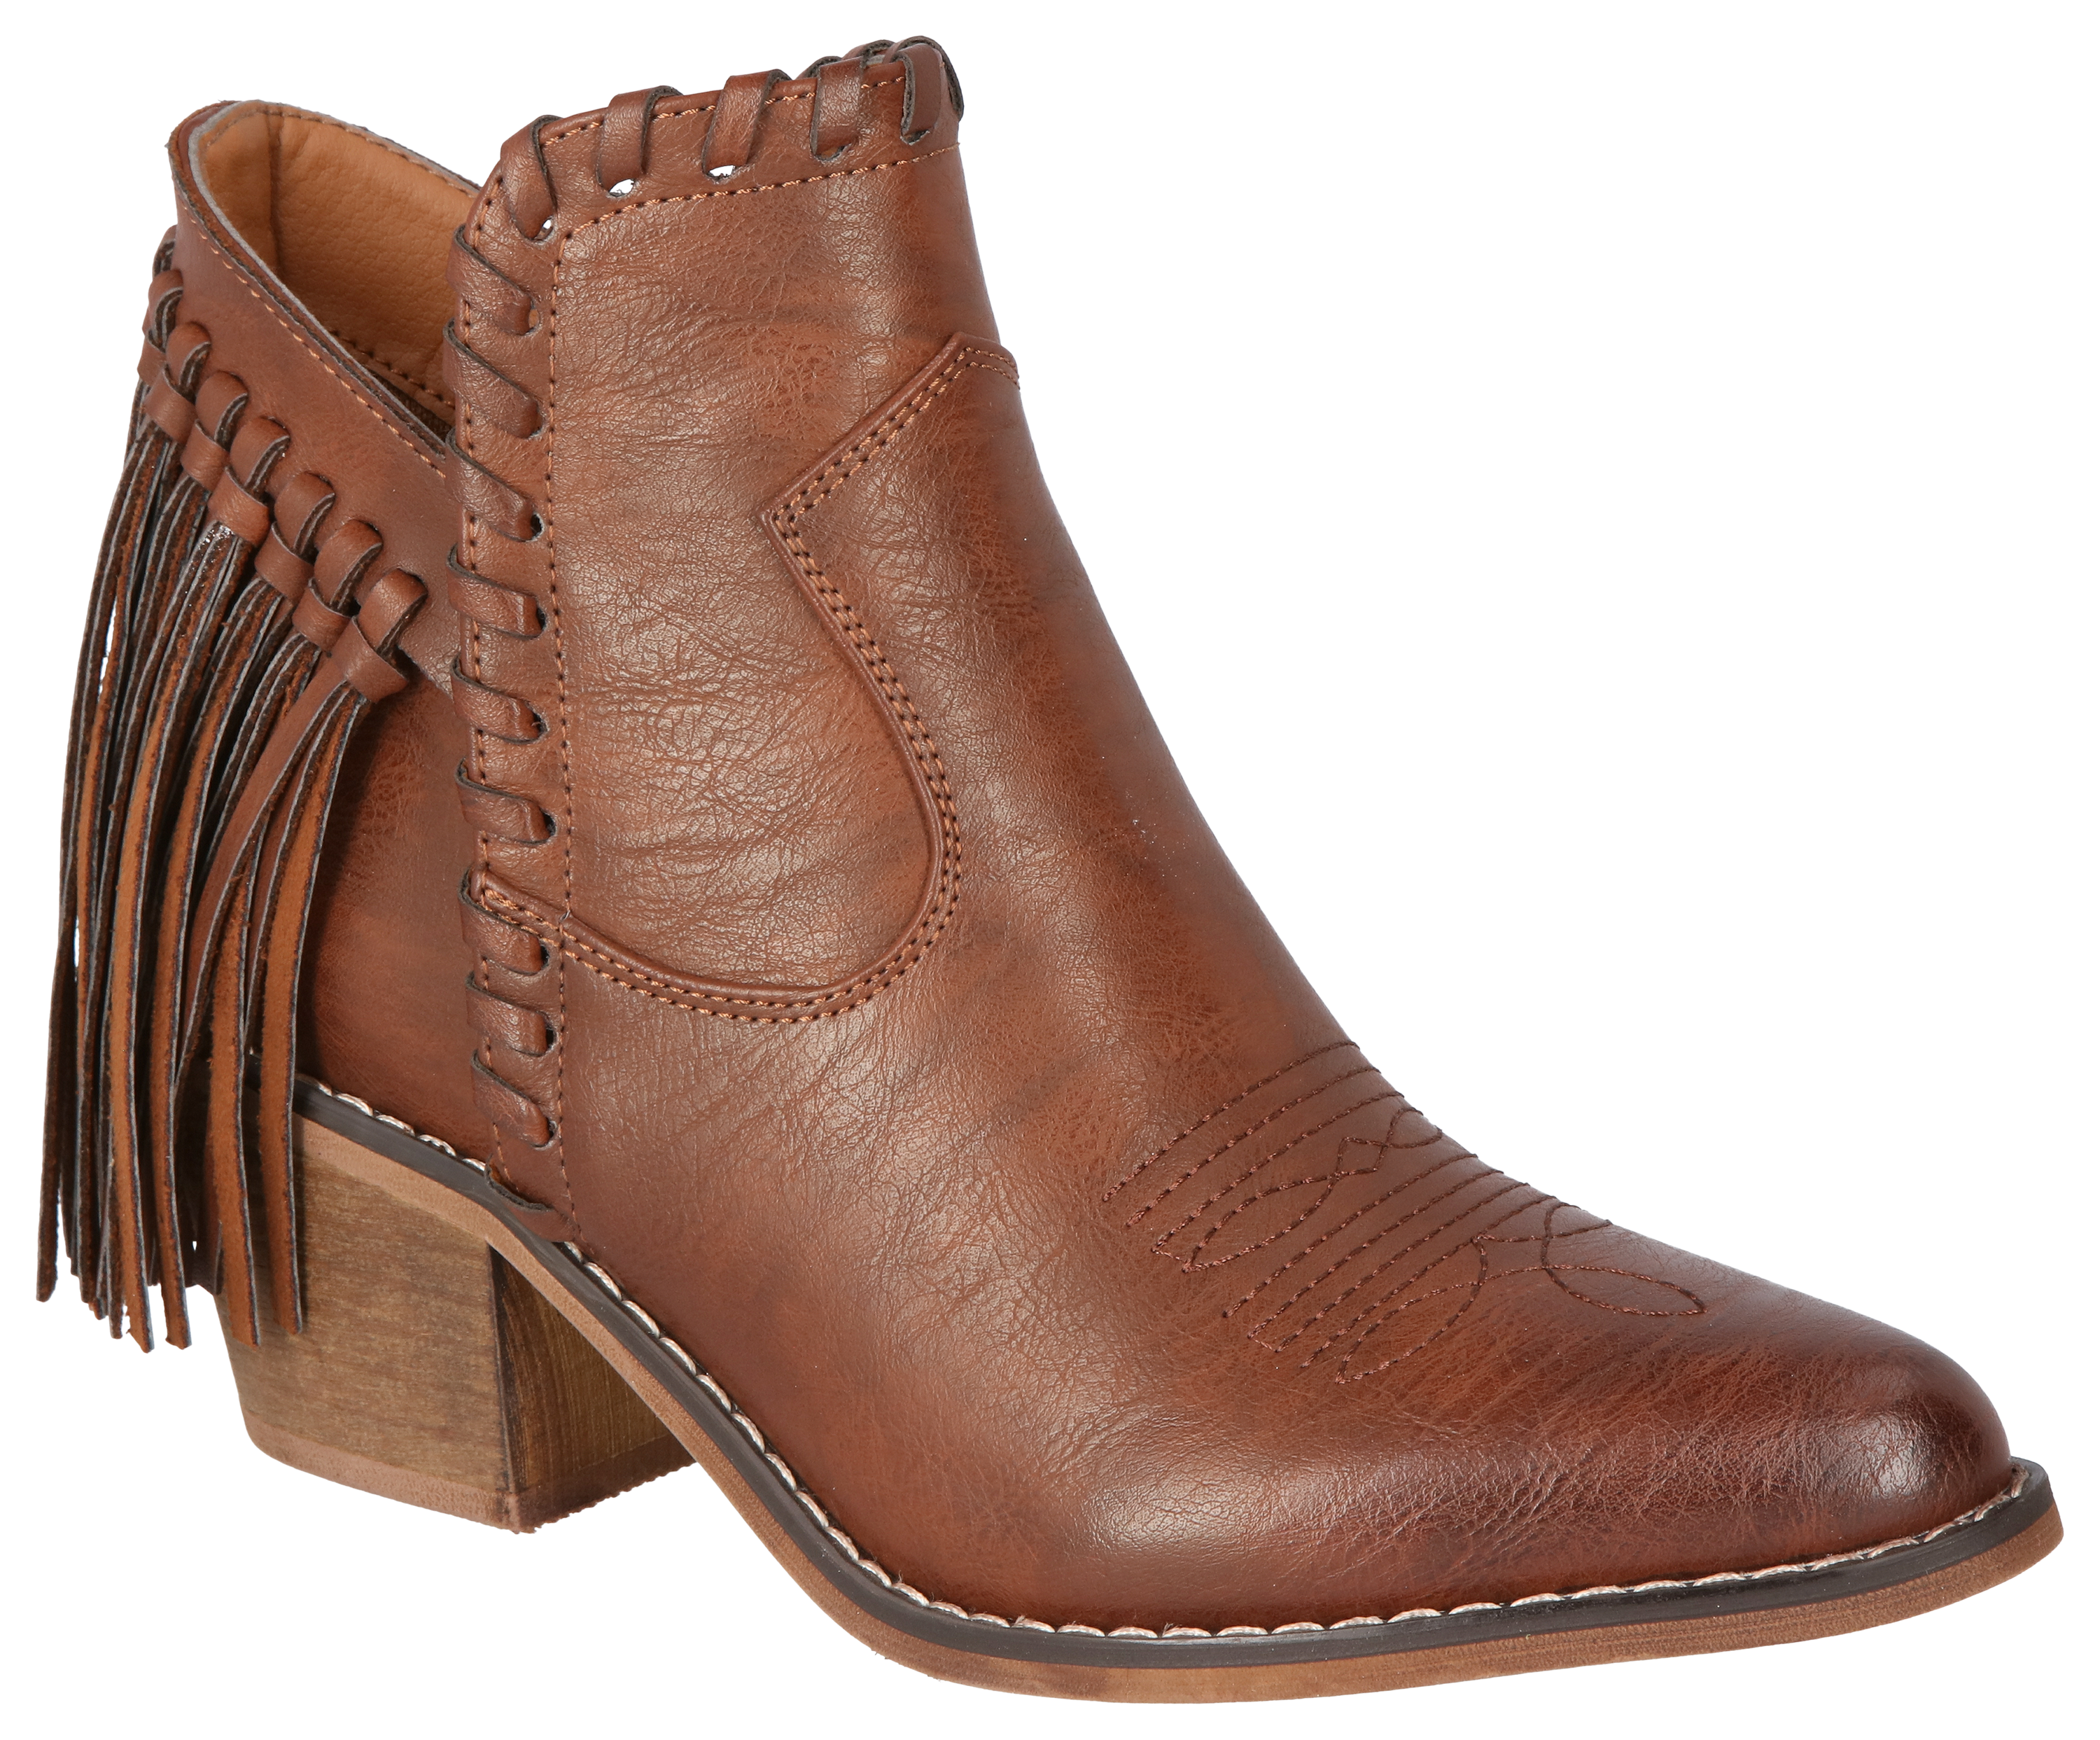 Natural Reflections Keykee Tassel Boots for Ladies - Whiskey - 7M